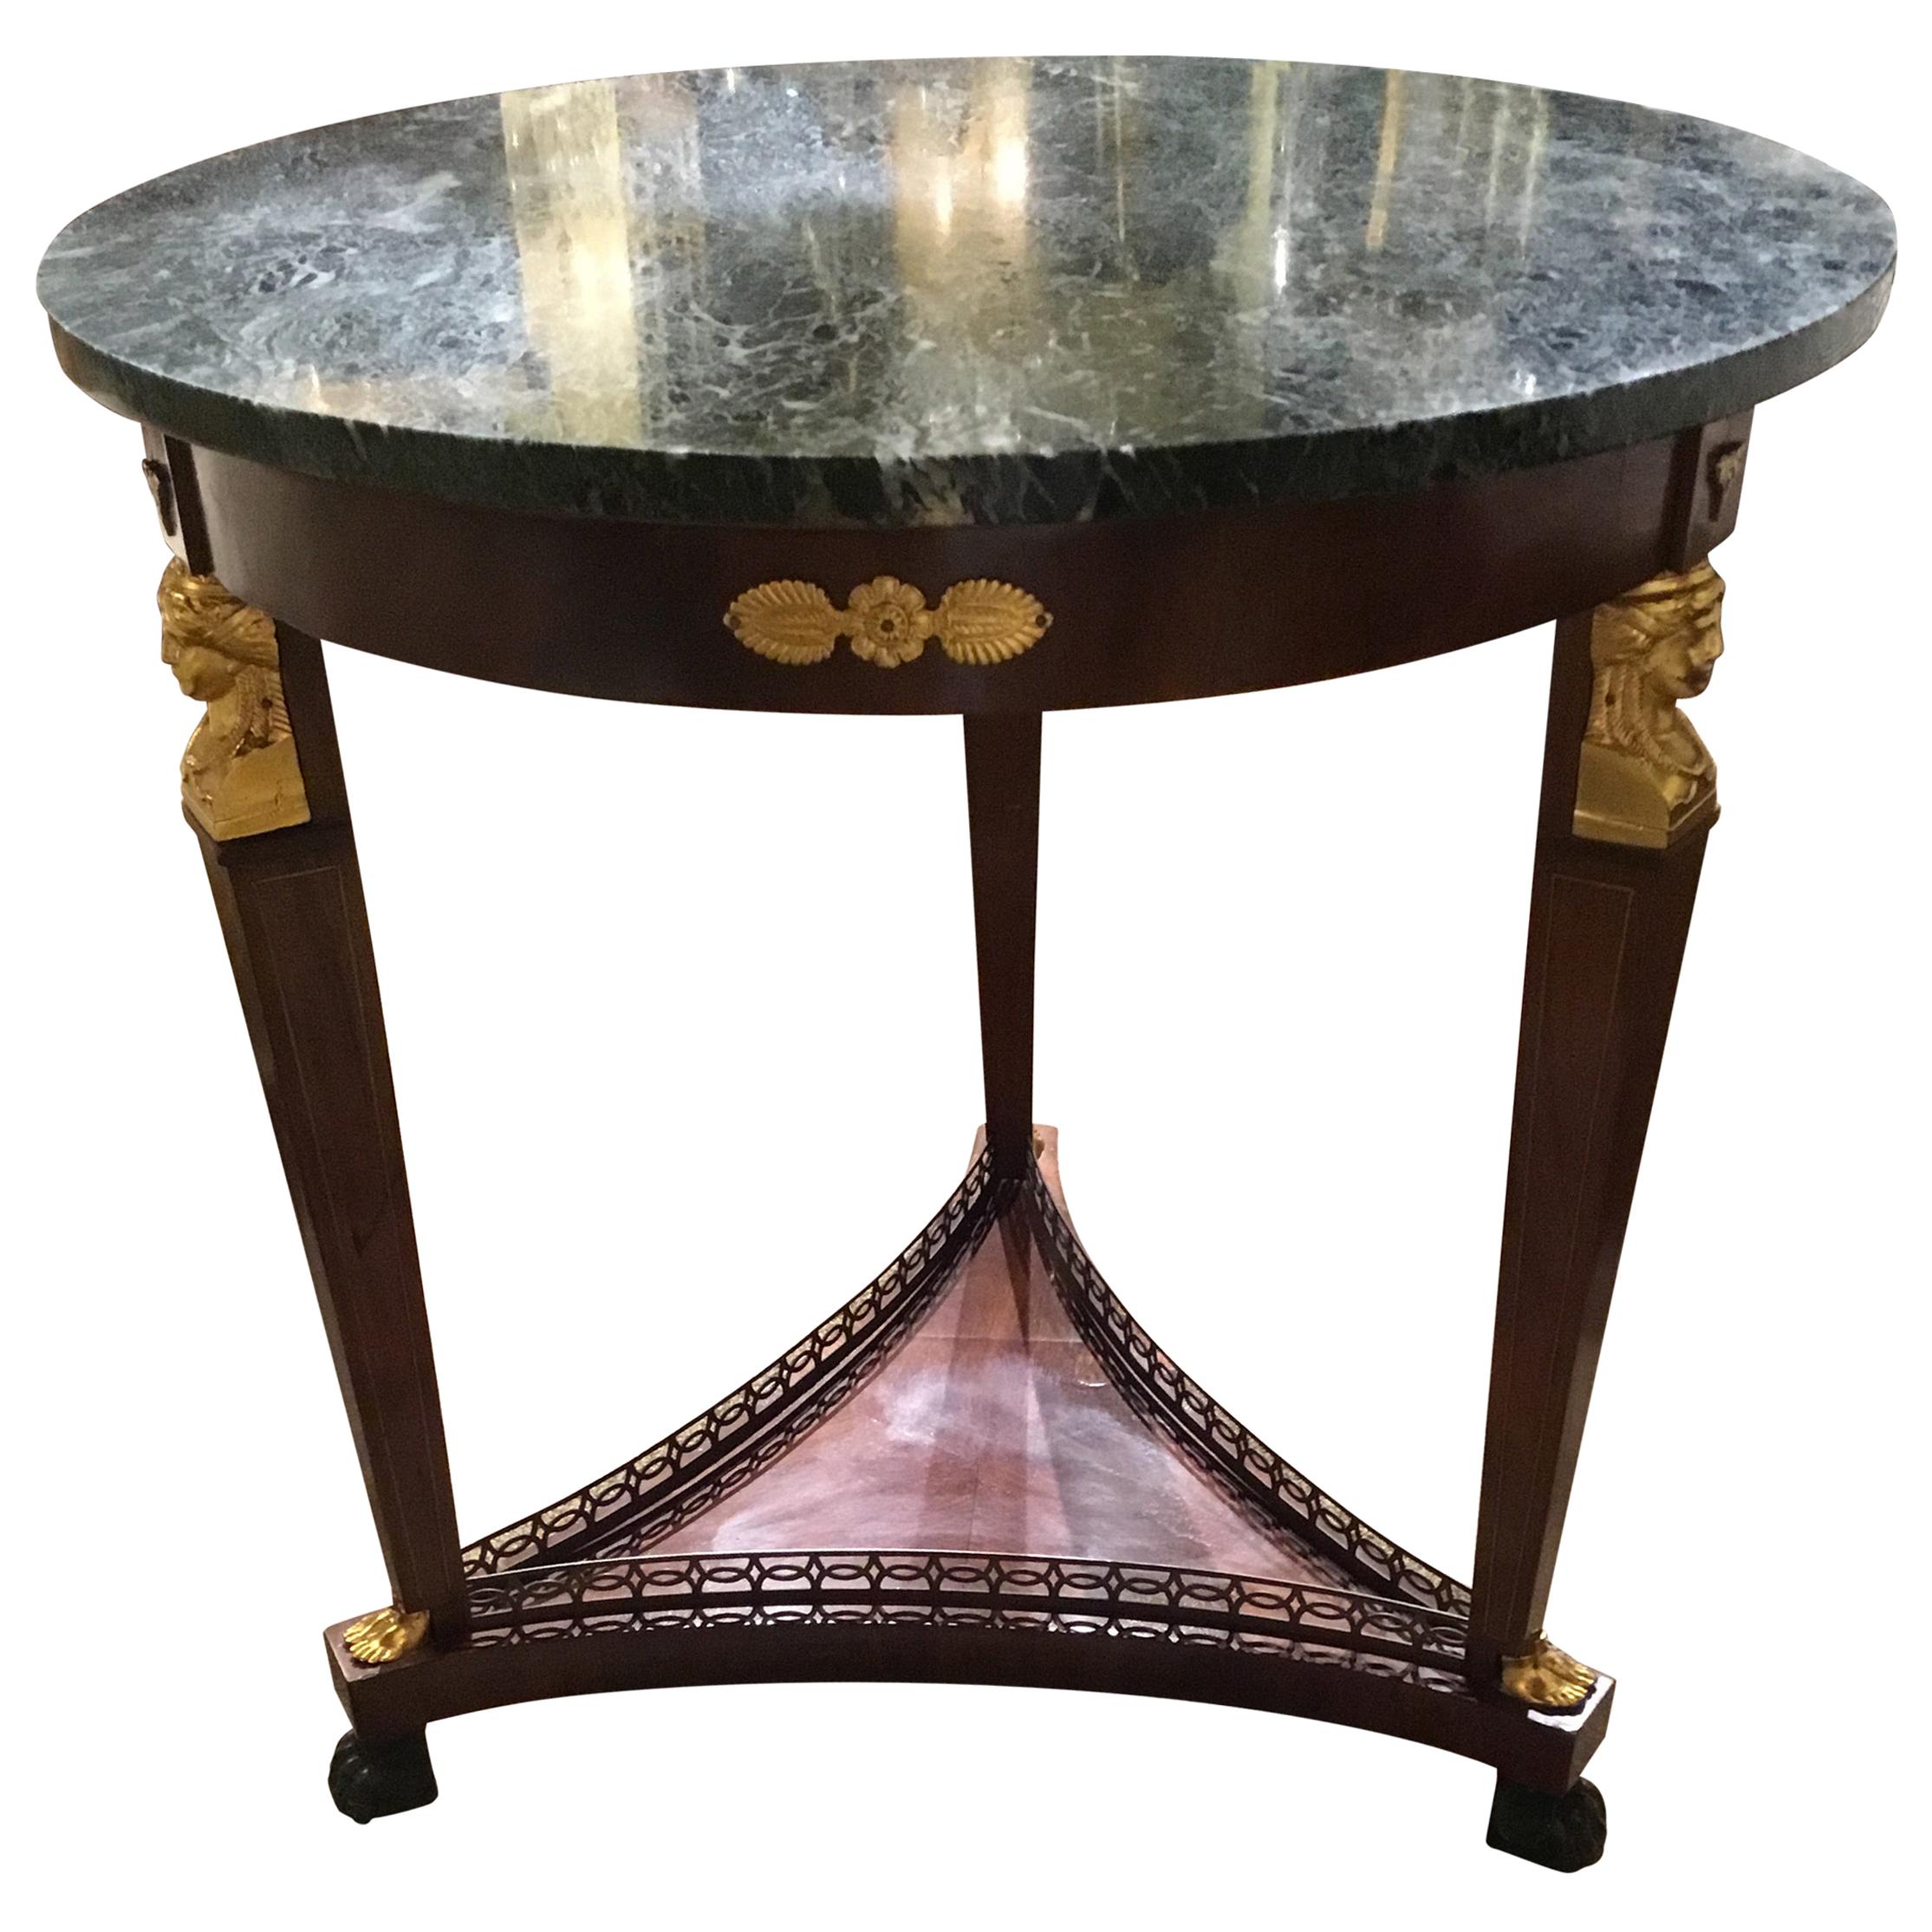 Empire Style French Gueridon Round Table with Green Marble Top 19th Century